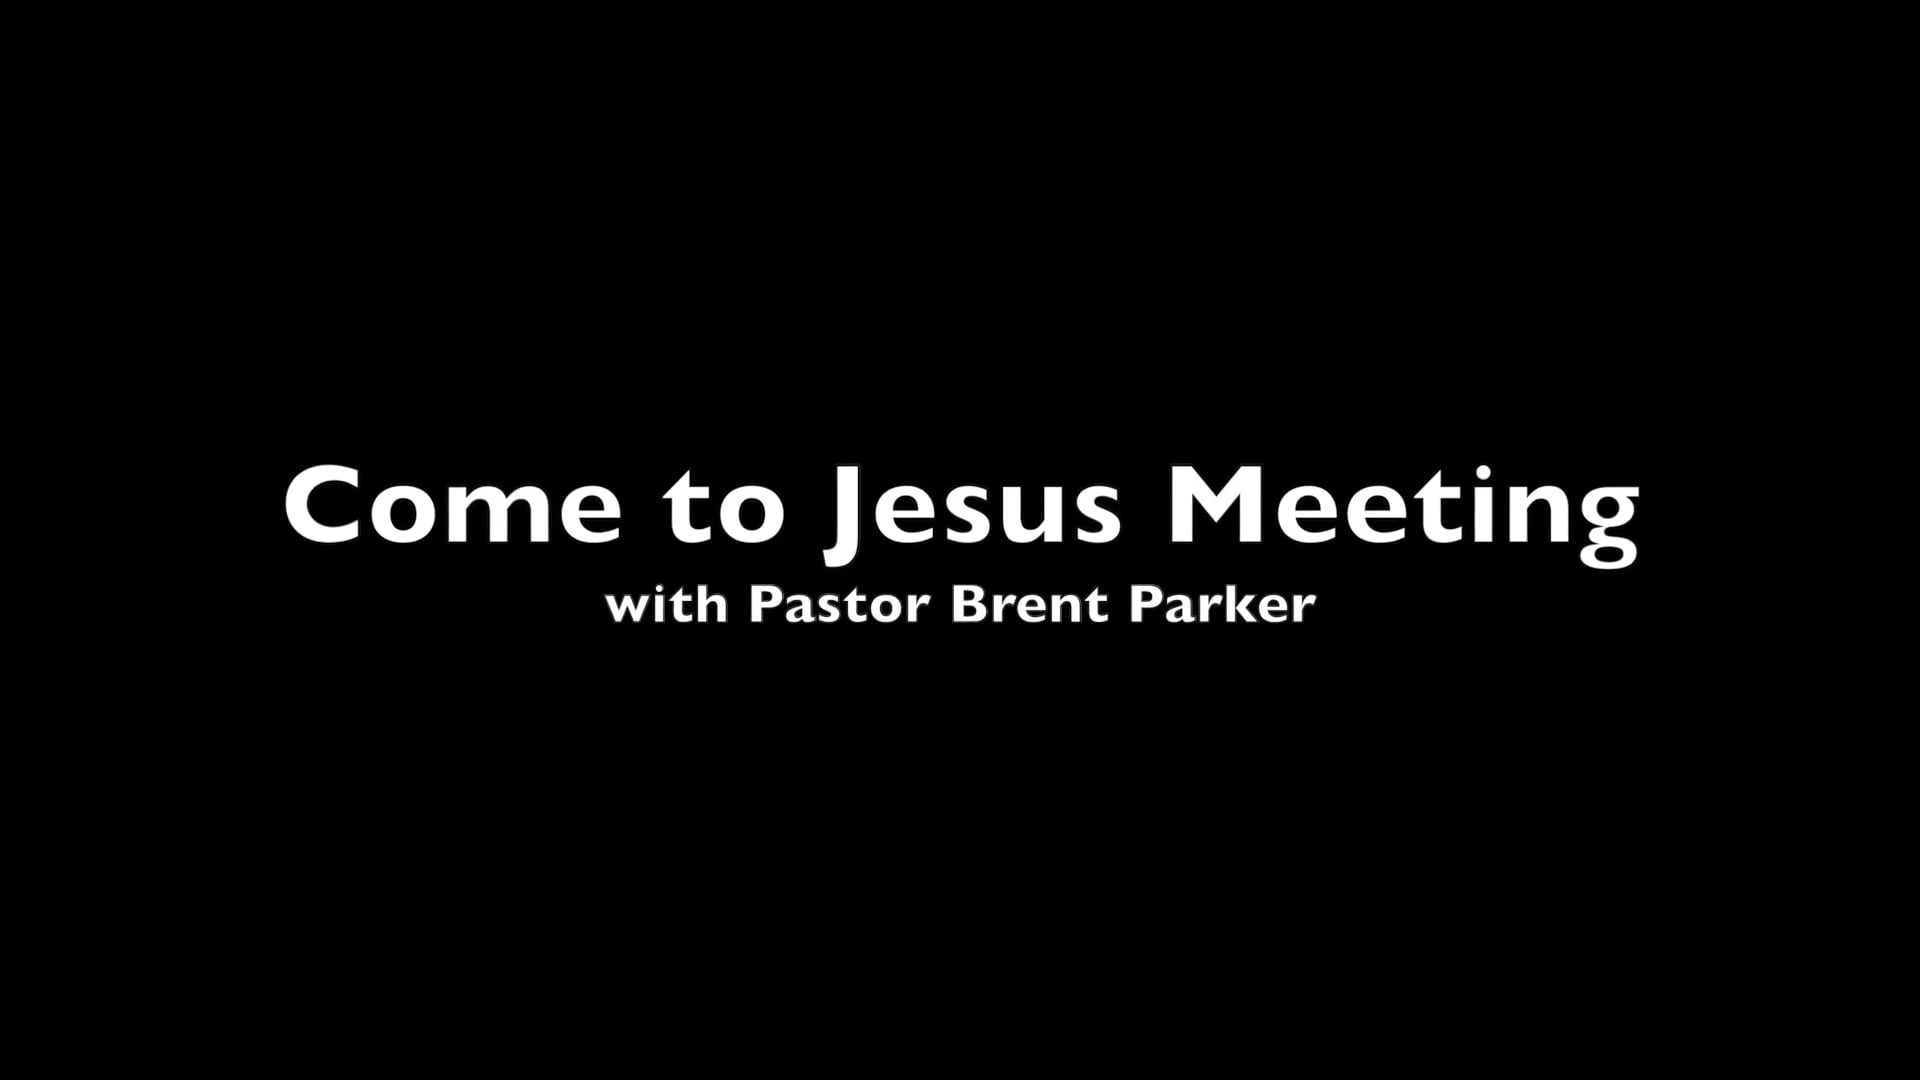 Come to Jesus Meeting - with Pastor Brent Parker on Vimeo